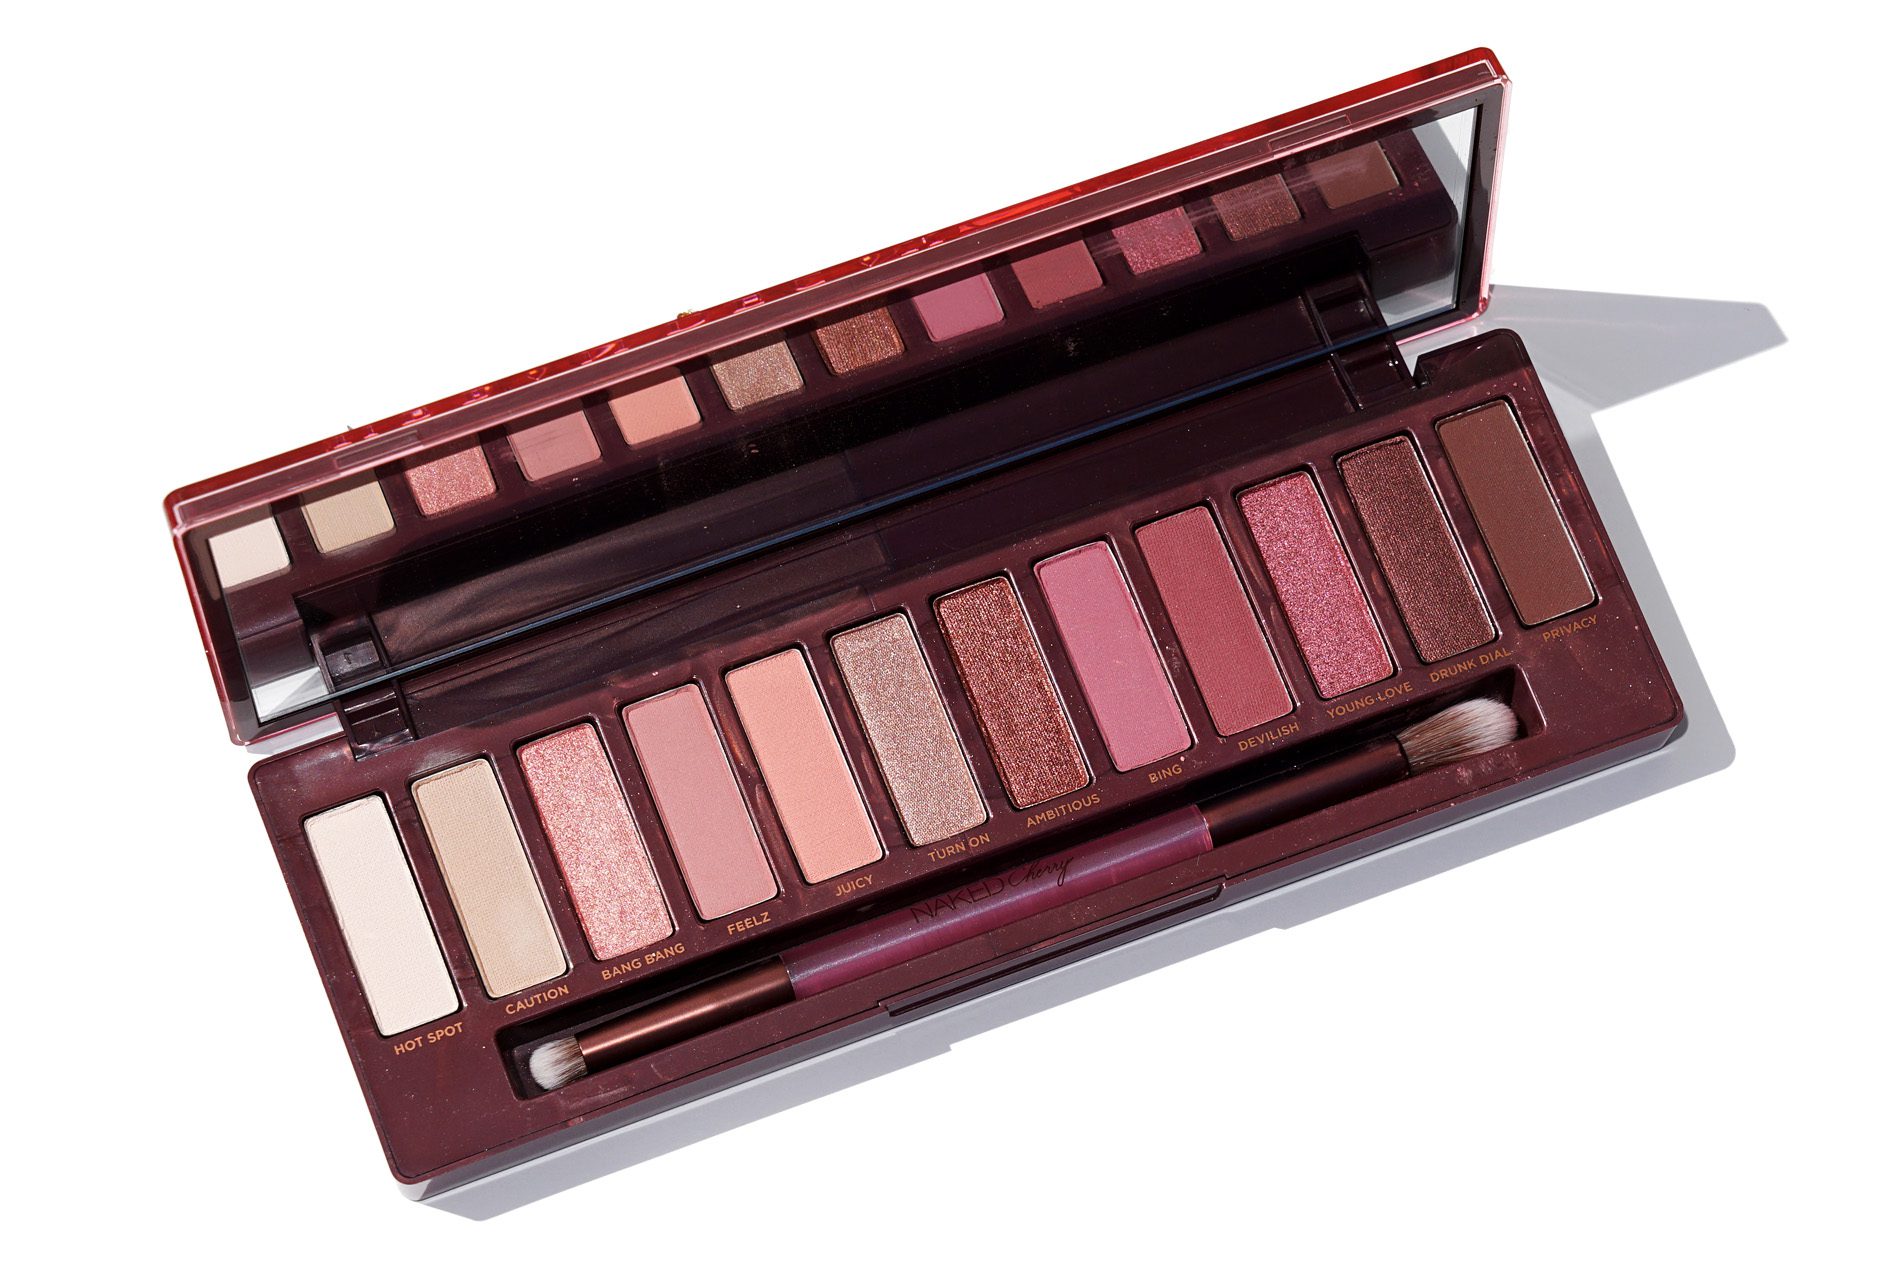 Urban Decay Naked3 Palette - The Beauty Look Book